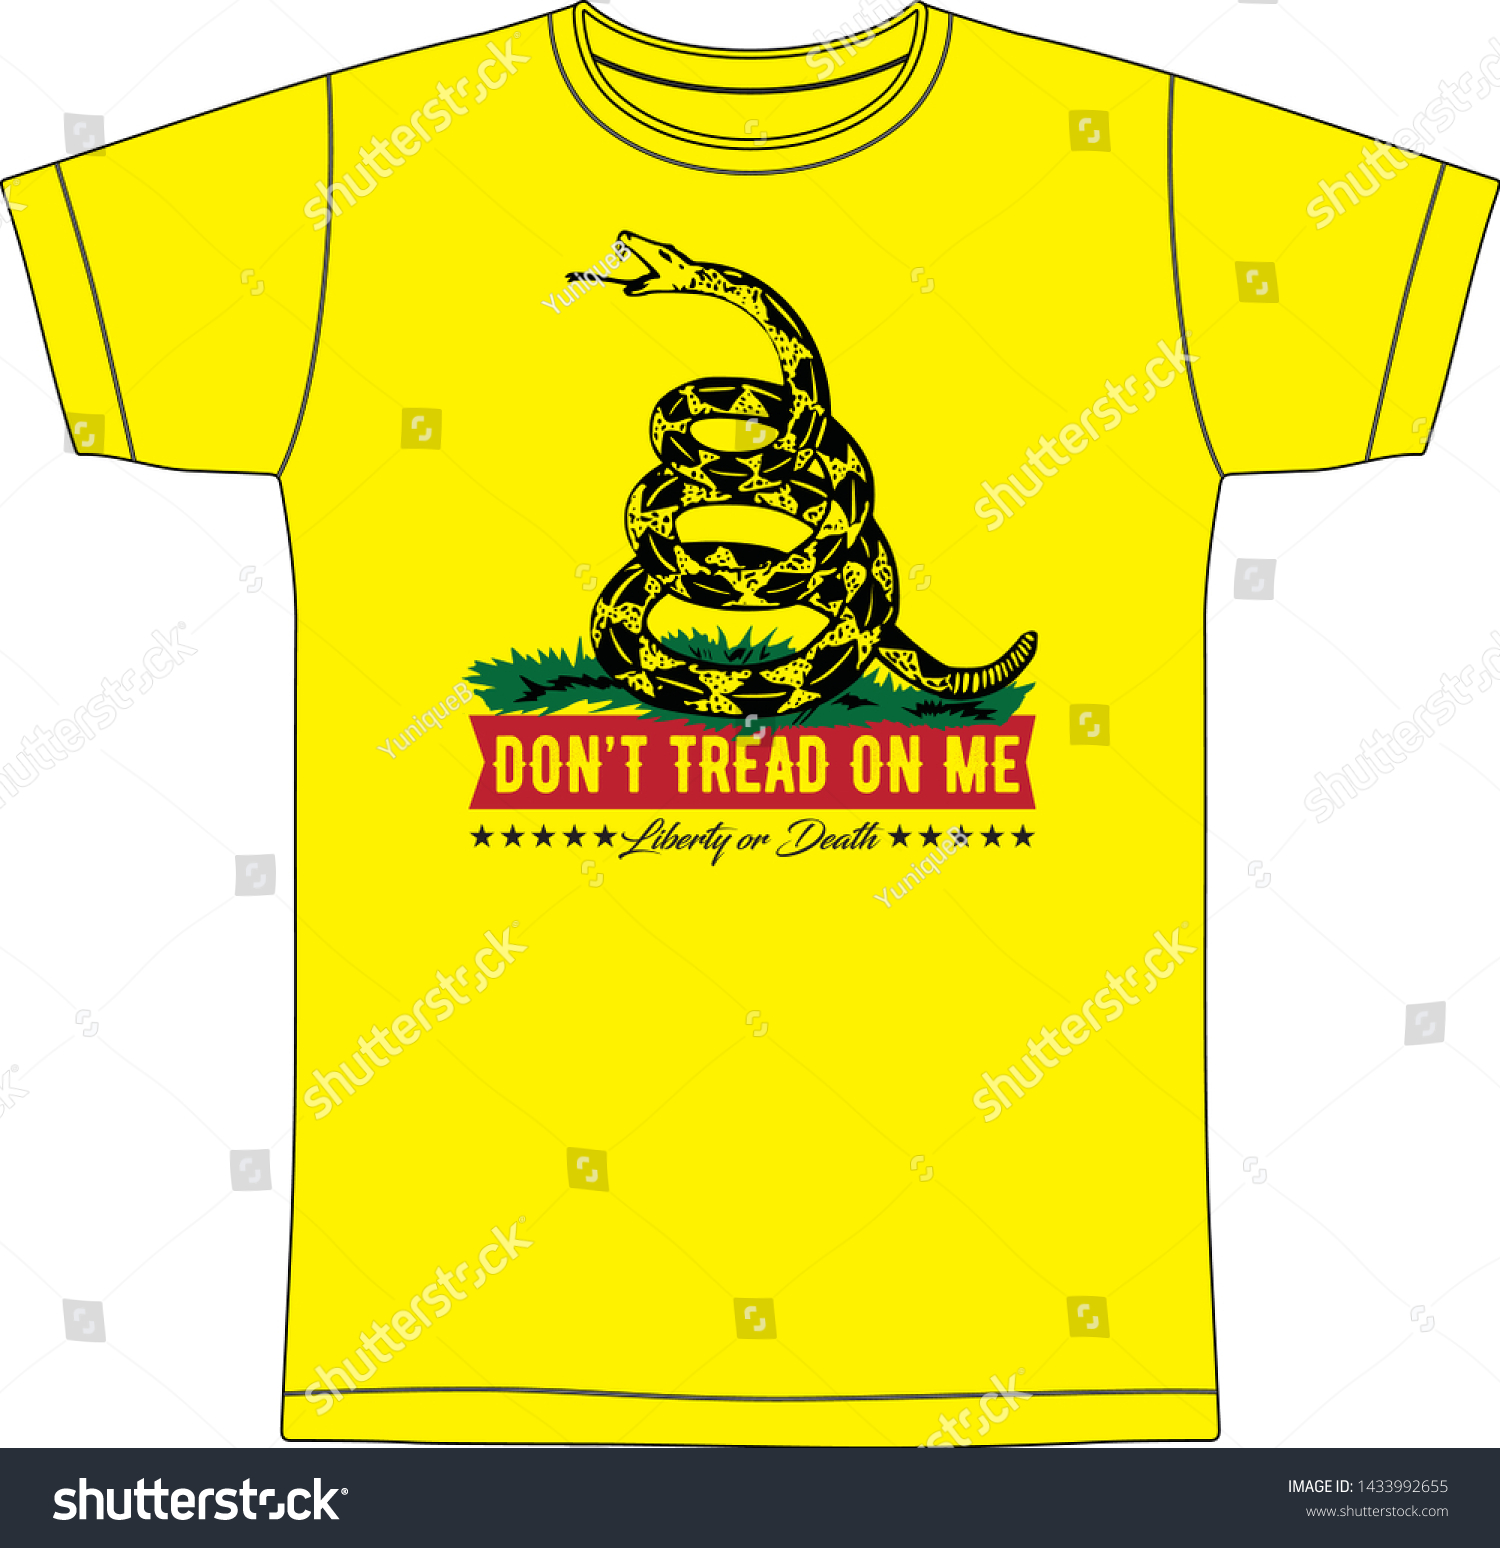 SVG of Don't Tread on Me T-shirt Graphic in Yellow T-shirt Template svg